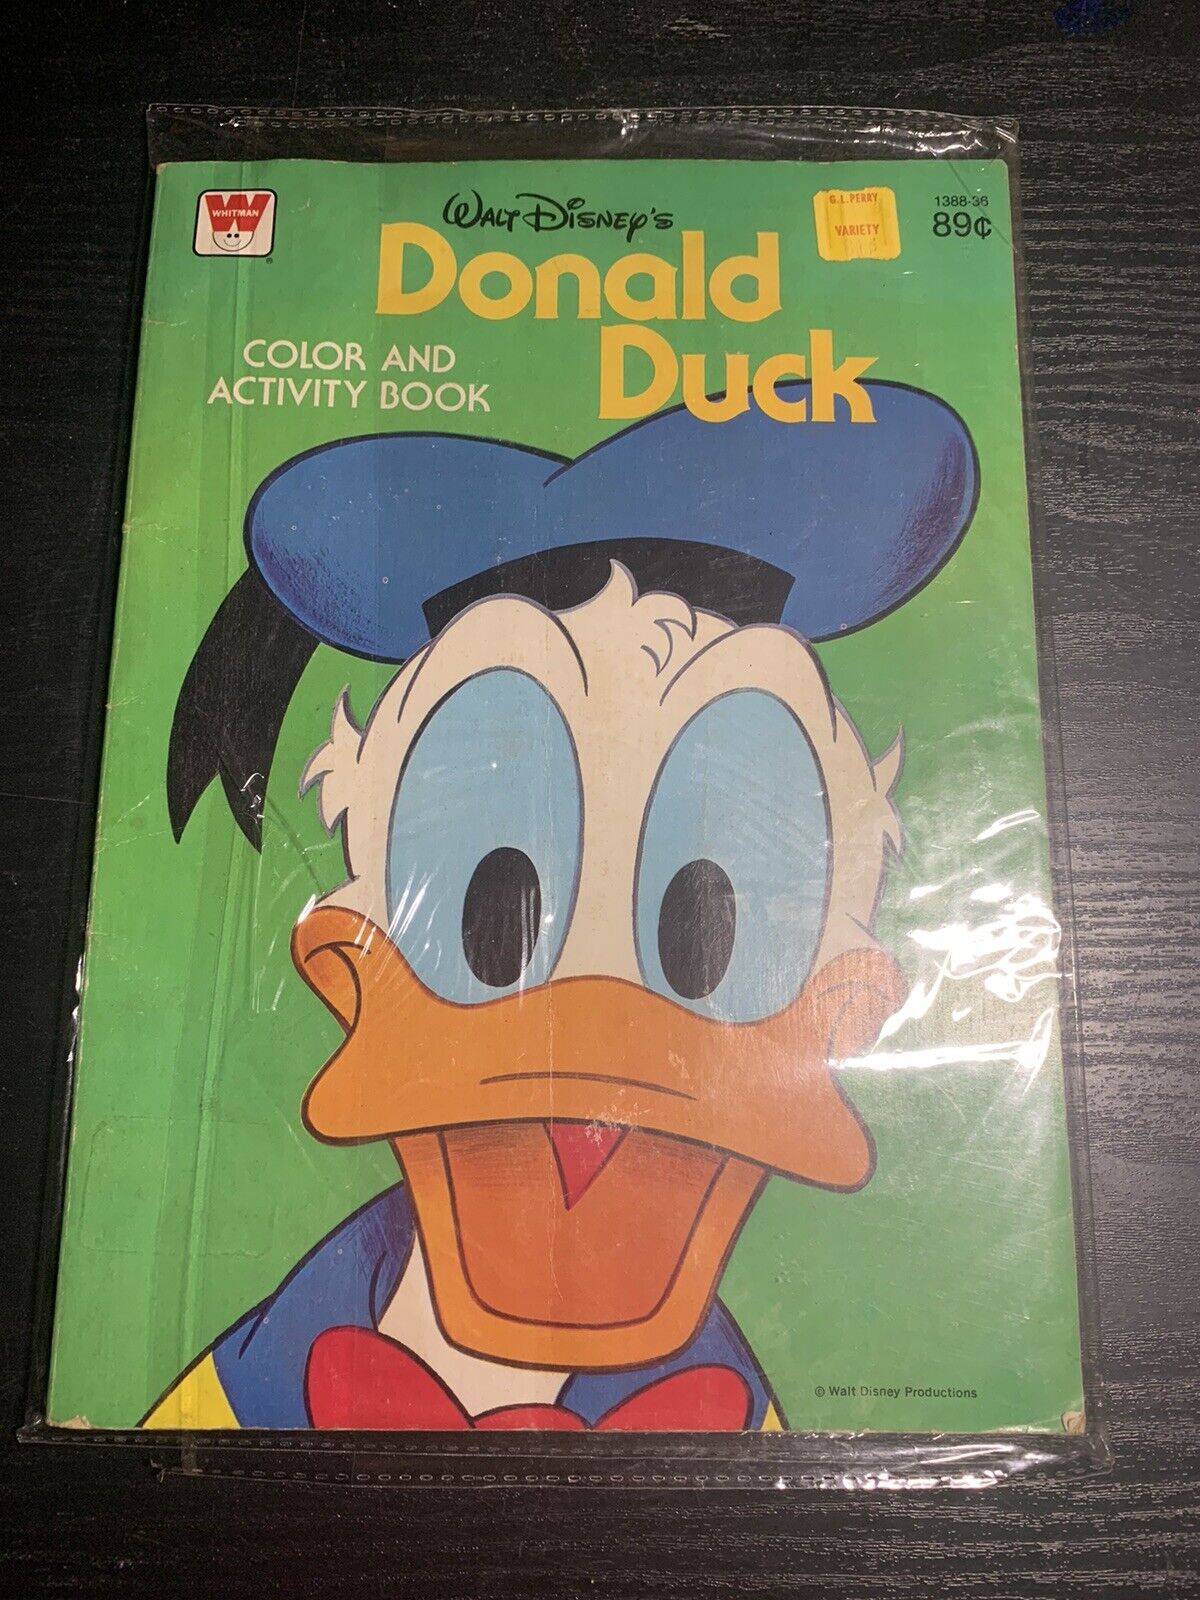 SEALED TRUE FIRST EDITION Disney Donald Duck COLOR AND ACTIVITY BOOK Vintage 